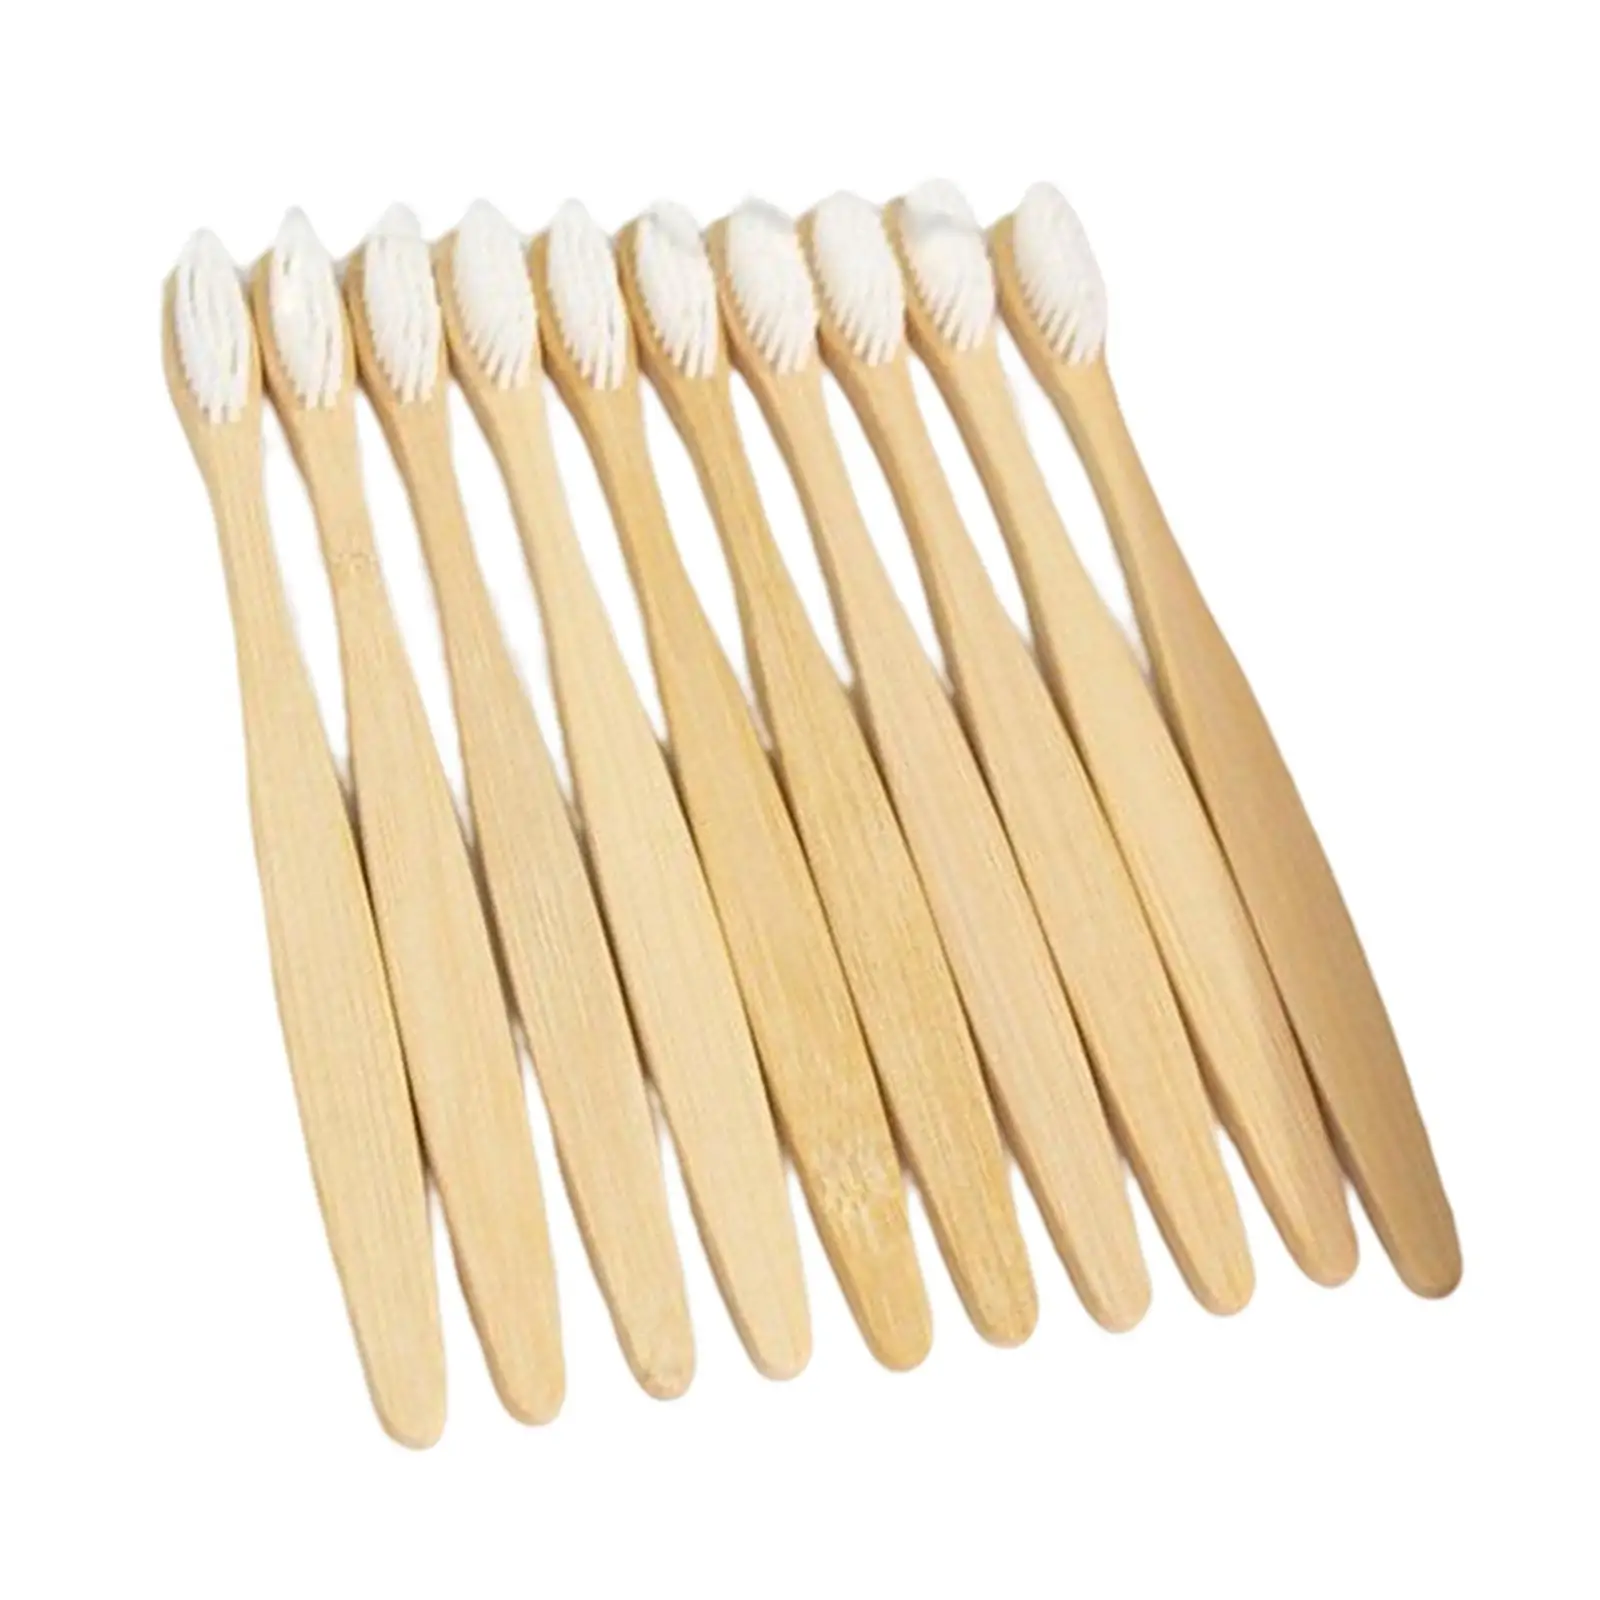 10 Pack Bamboo Toothbrushes Disposable for